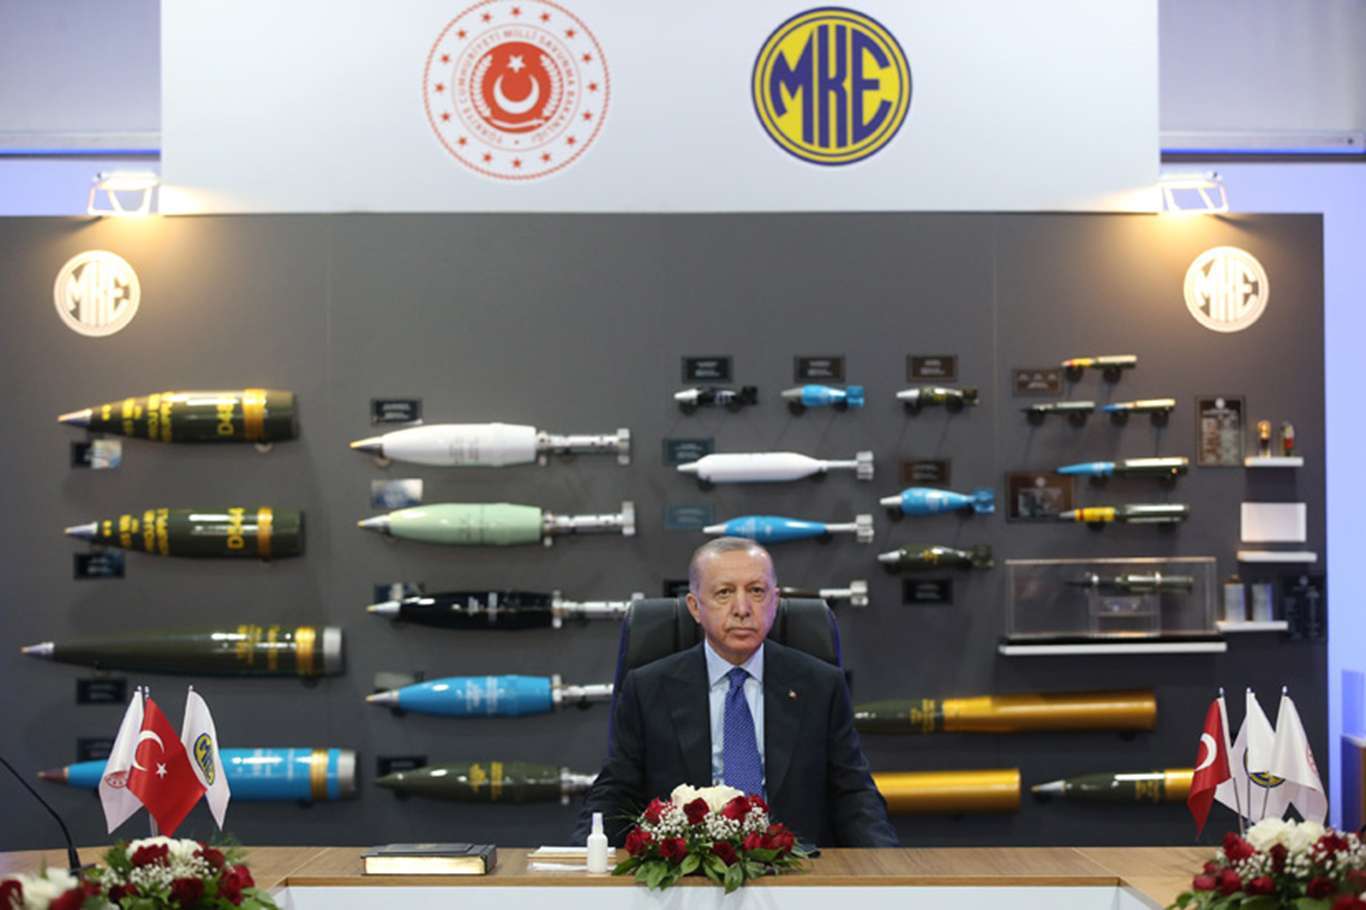 Erdoğan attends opening ceremony of Energetic Materials Production Facility